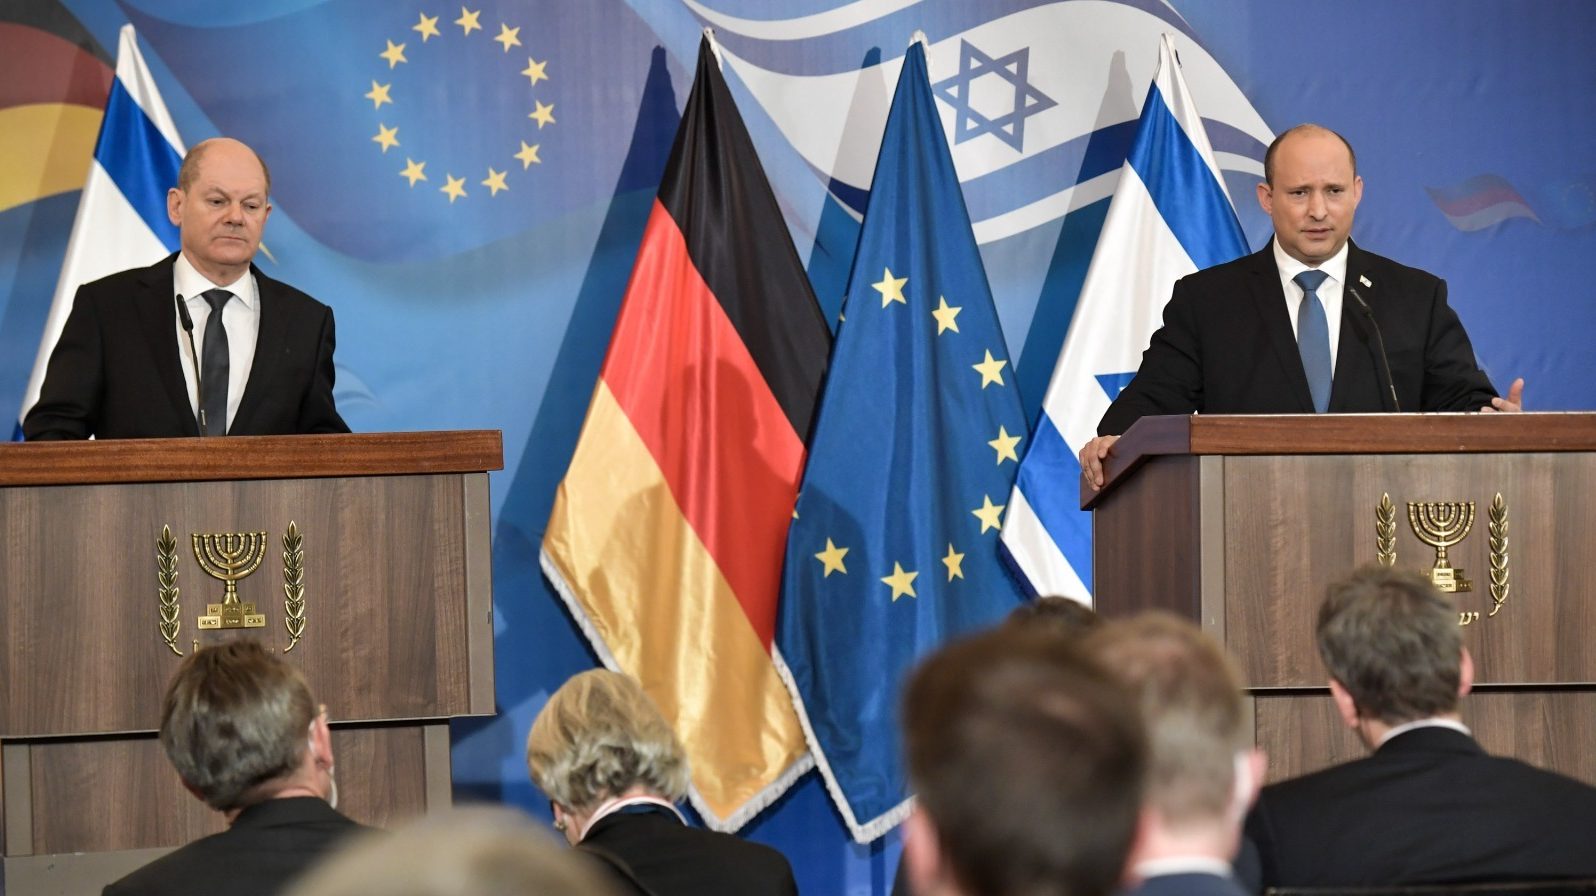 Germany, Israel Announce New Strategic Cooperation During Chancellor’s Jerusalem Visit